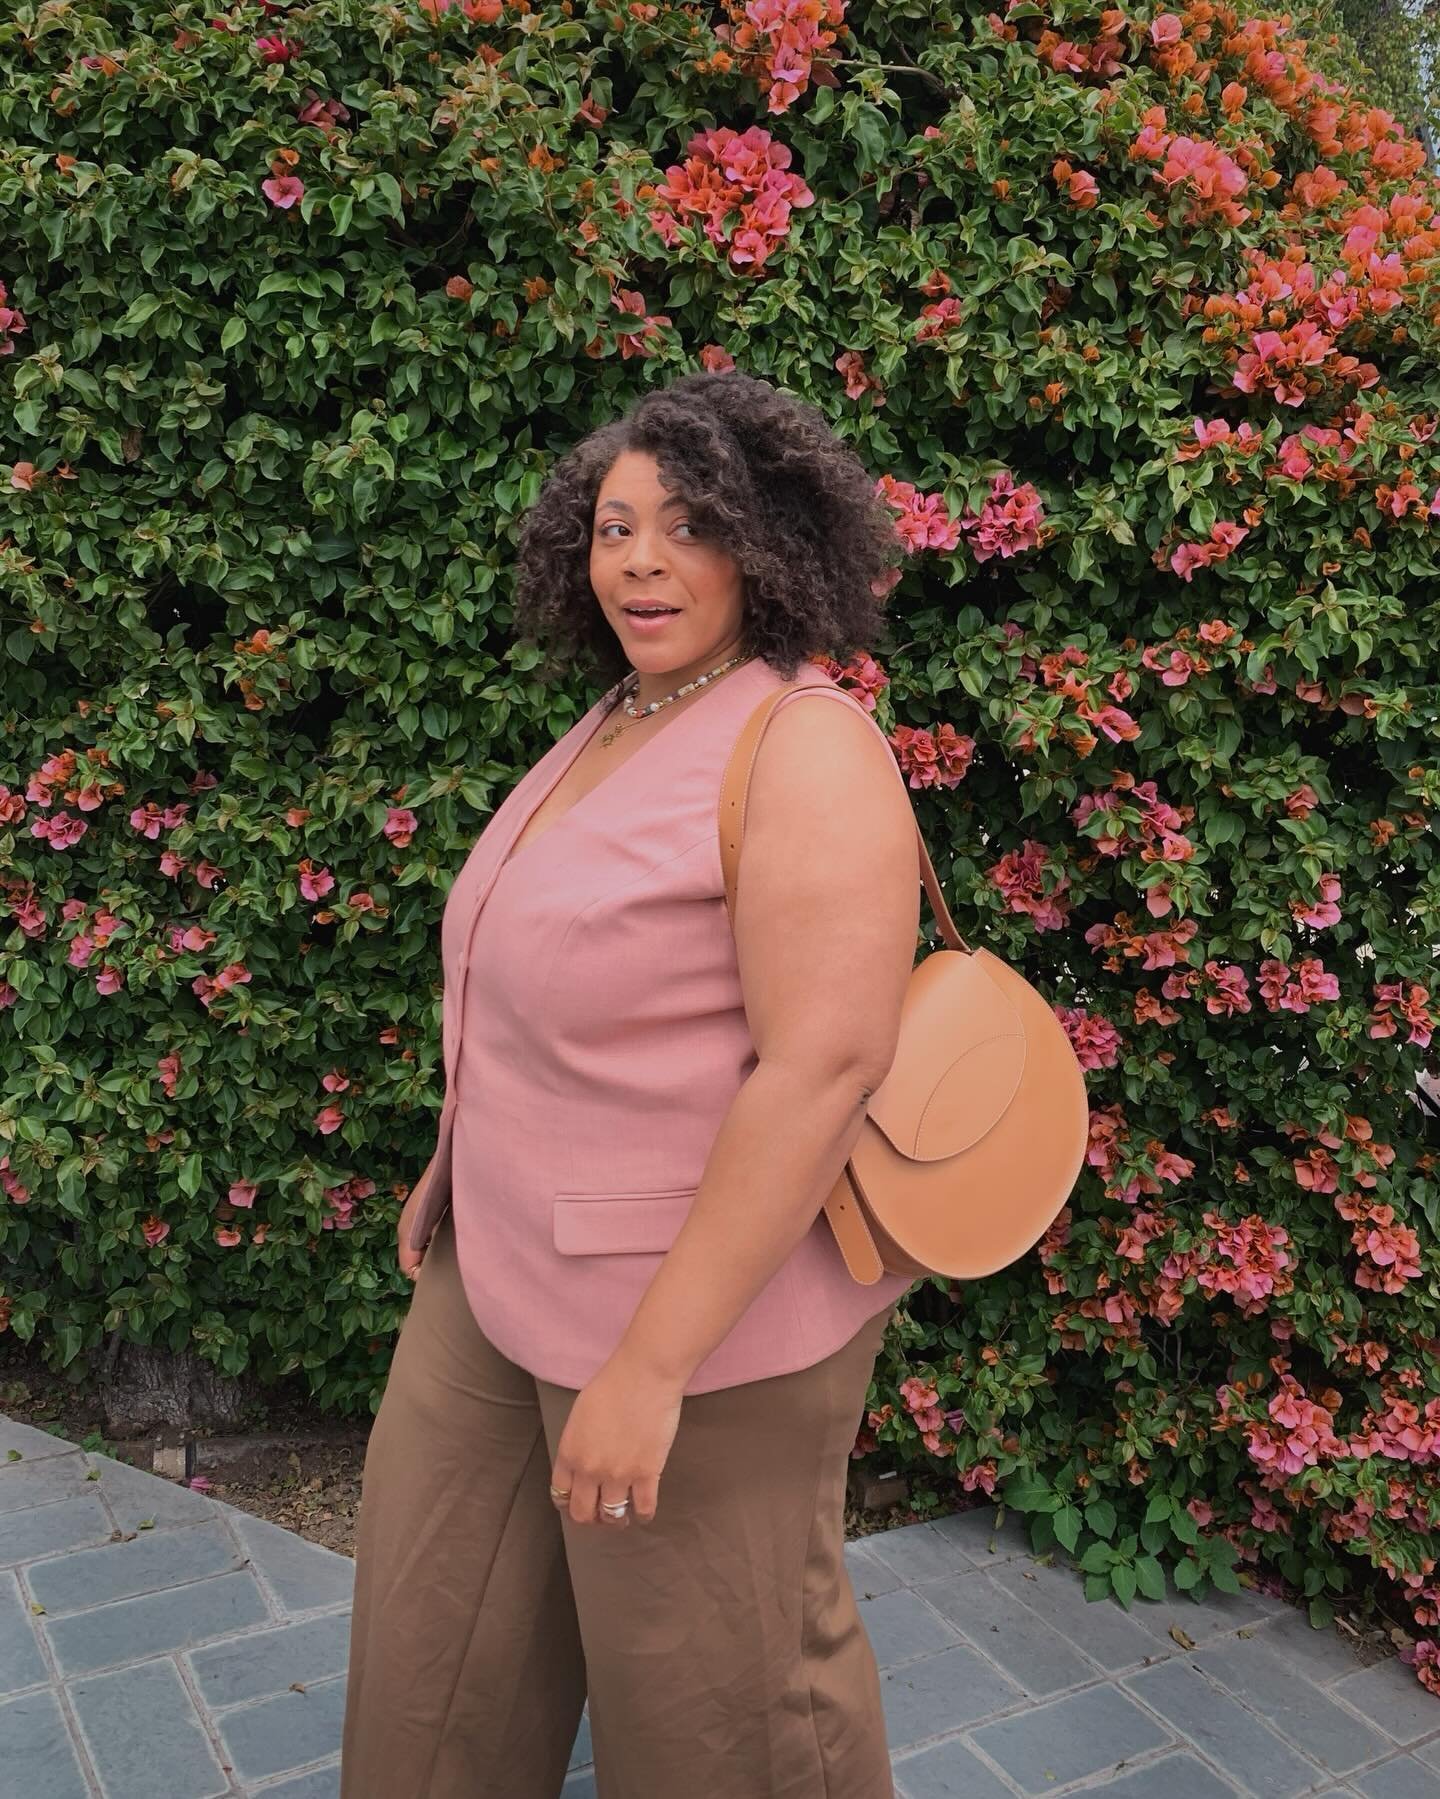 It&rsquo;s never a dull moment when you have your favorite bag on hand and the perfect backdrop for a cute photo&mdash; @arielleestoria perfectly showcasing her Velita Saddle bag in color Natural